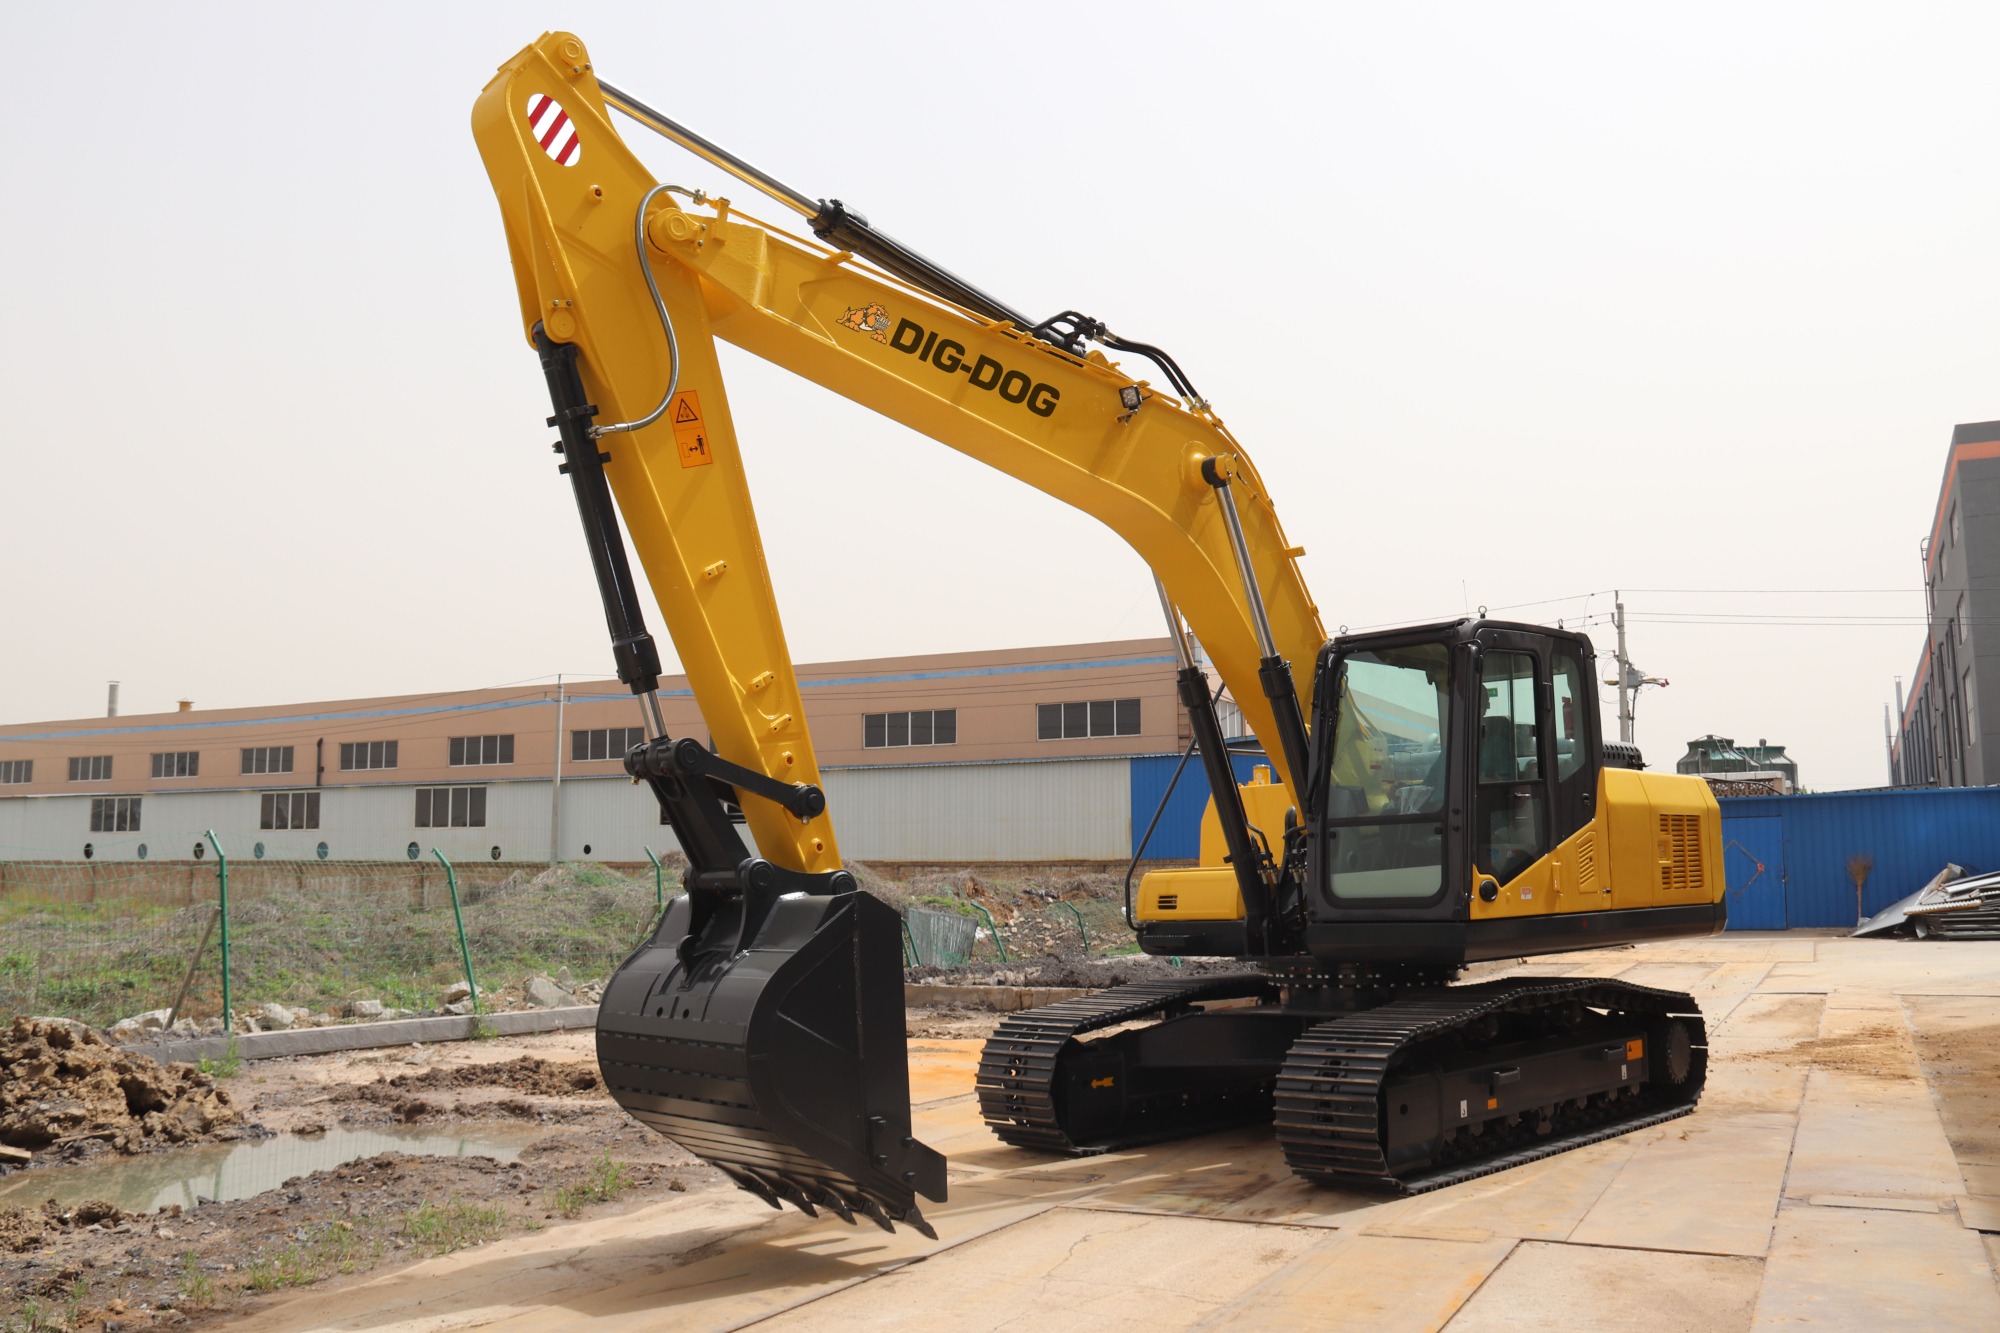 How to Choose an Excavator?